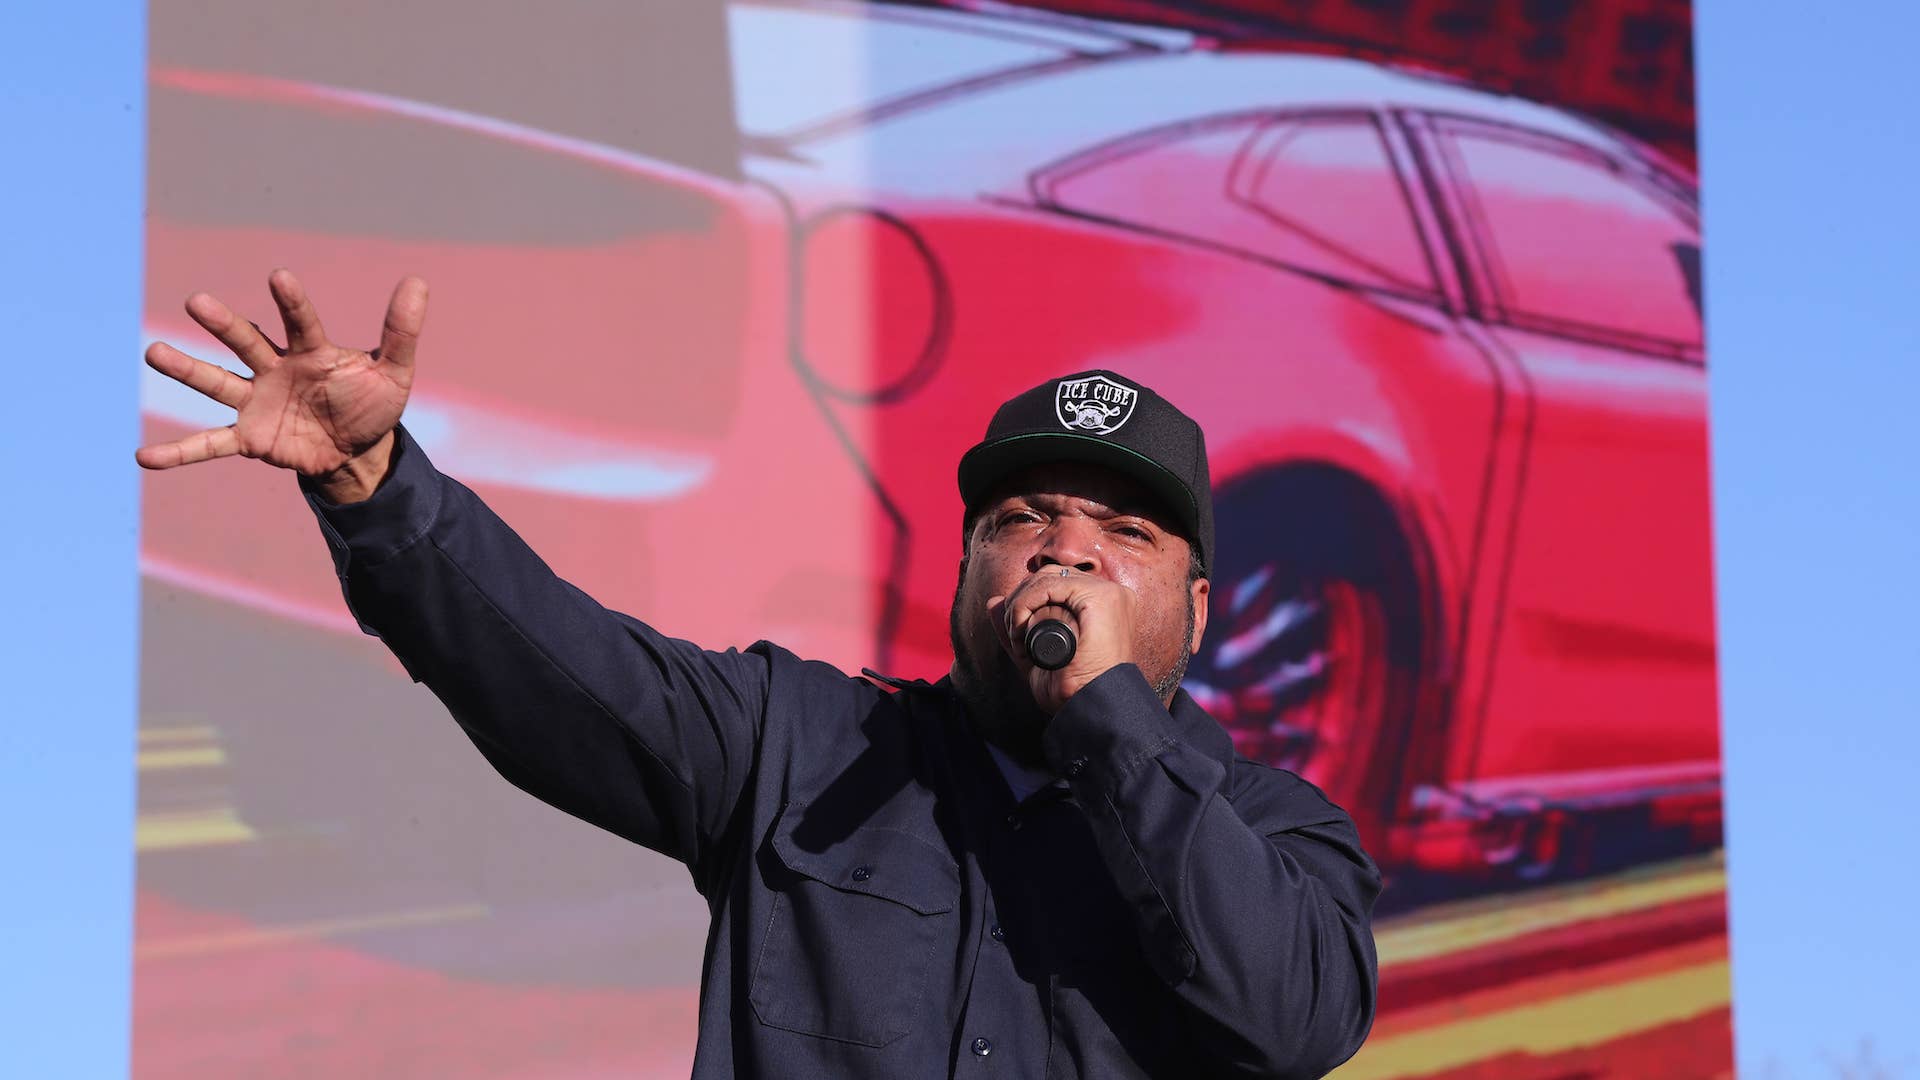 Rapper Ice Cube performs at the Busch Light Clash At The Coliseum.